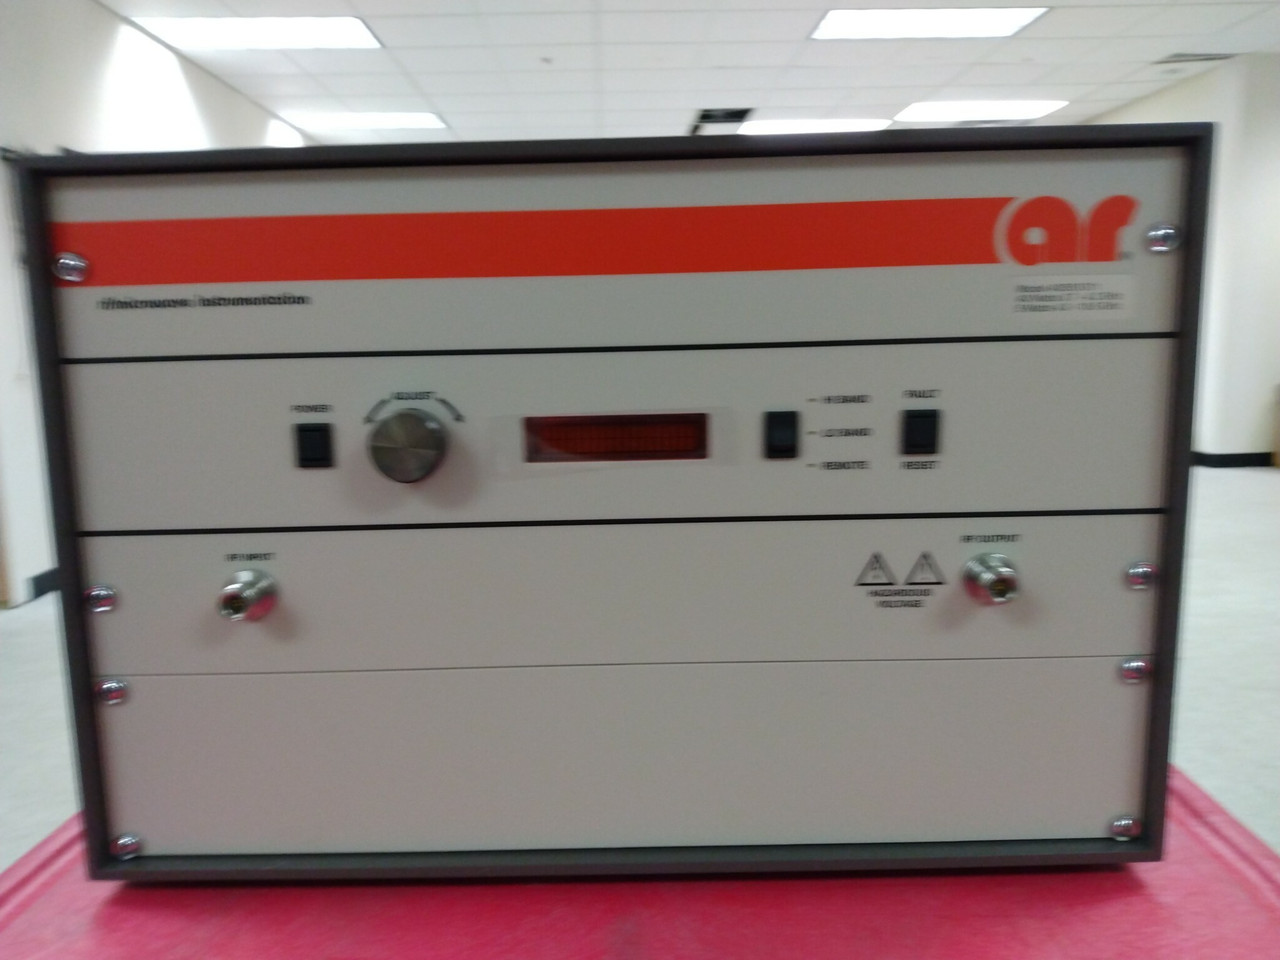 Amplifier Research 40/5S1G11 Dual-band Amplifier 700 MHz - 10.6 GHz